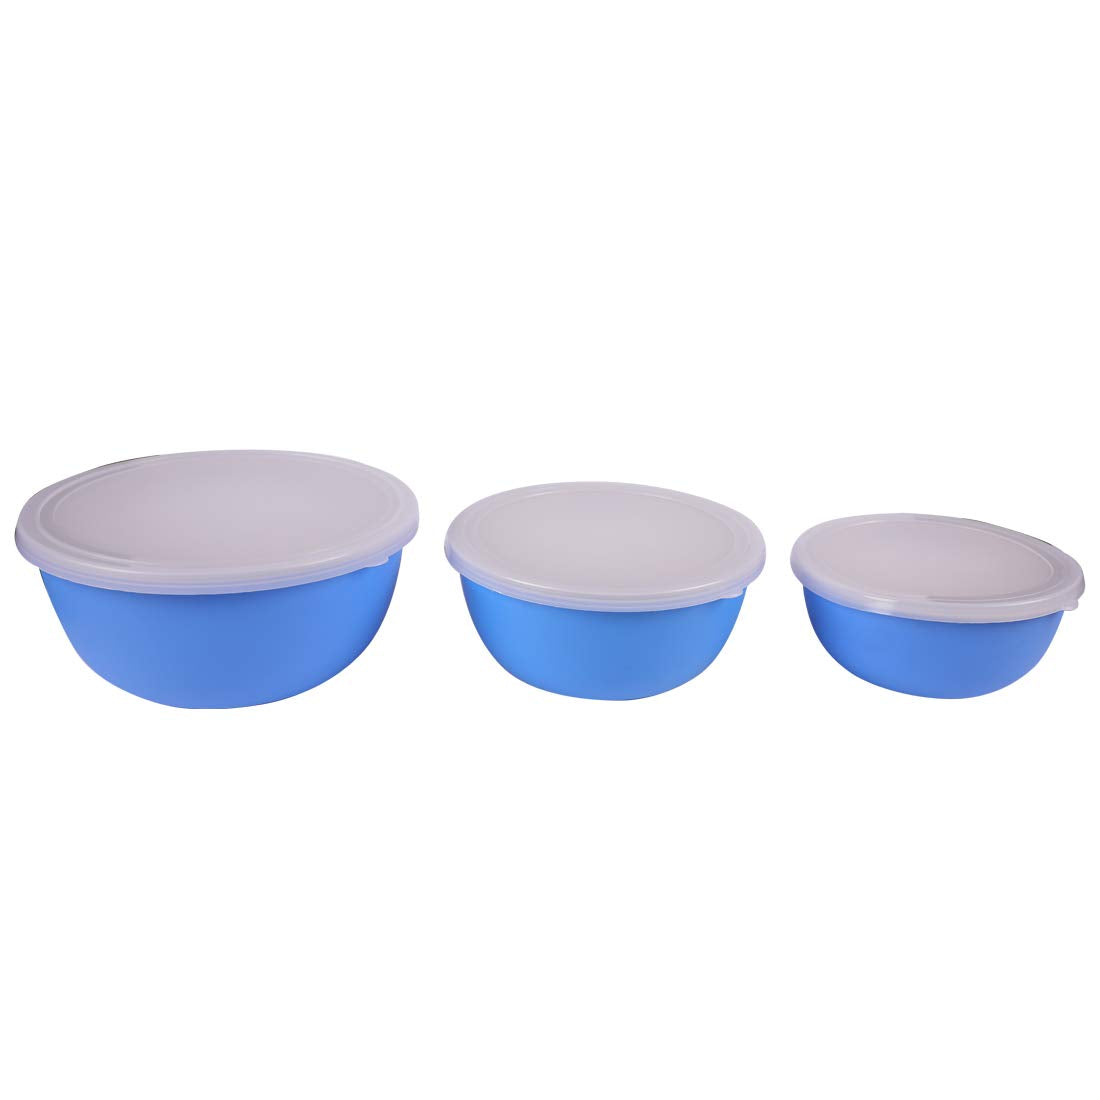 Microwave Safe Stainless Steel Plastic Coated Euro Bowl Set of 3 (Capacity 450 ML 700ML 1200ML)